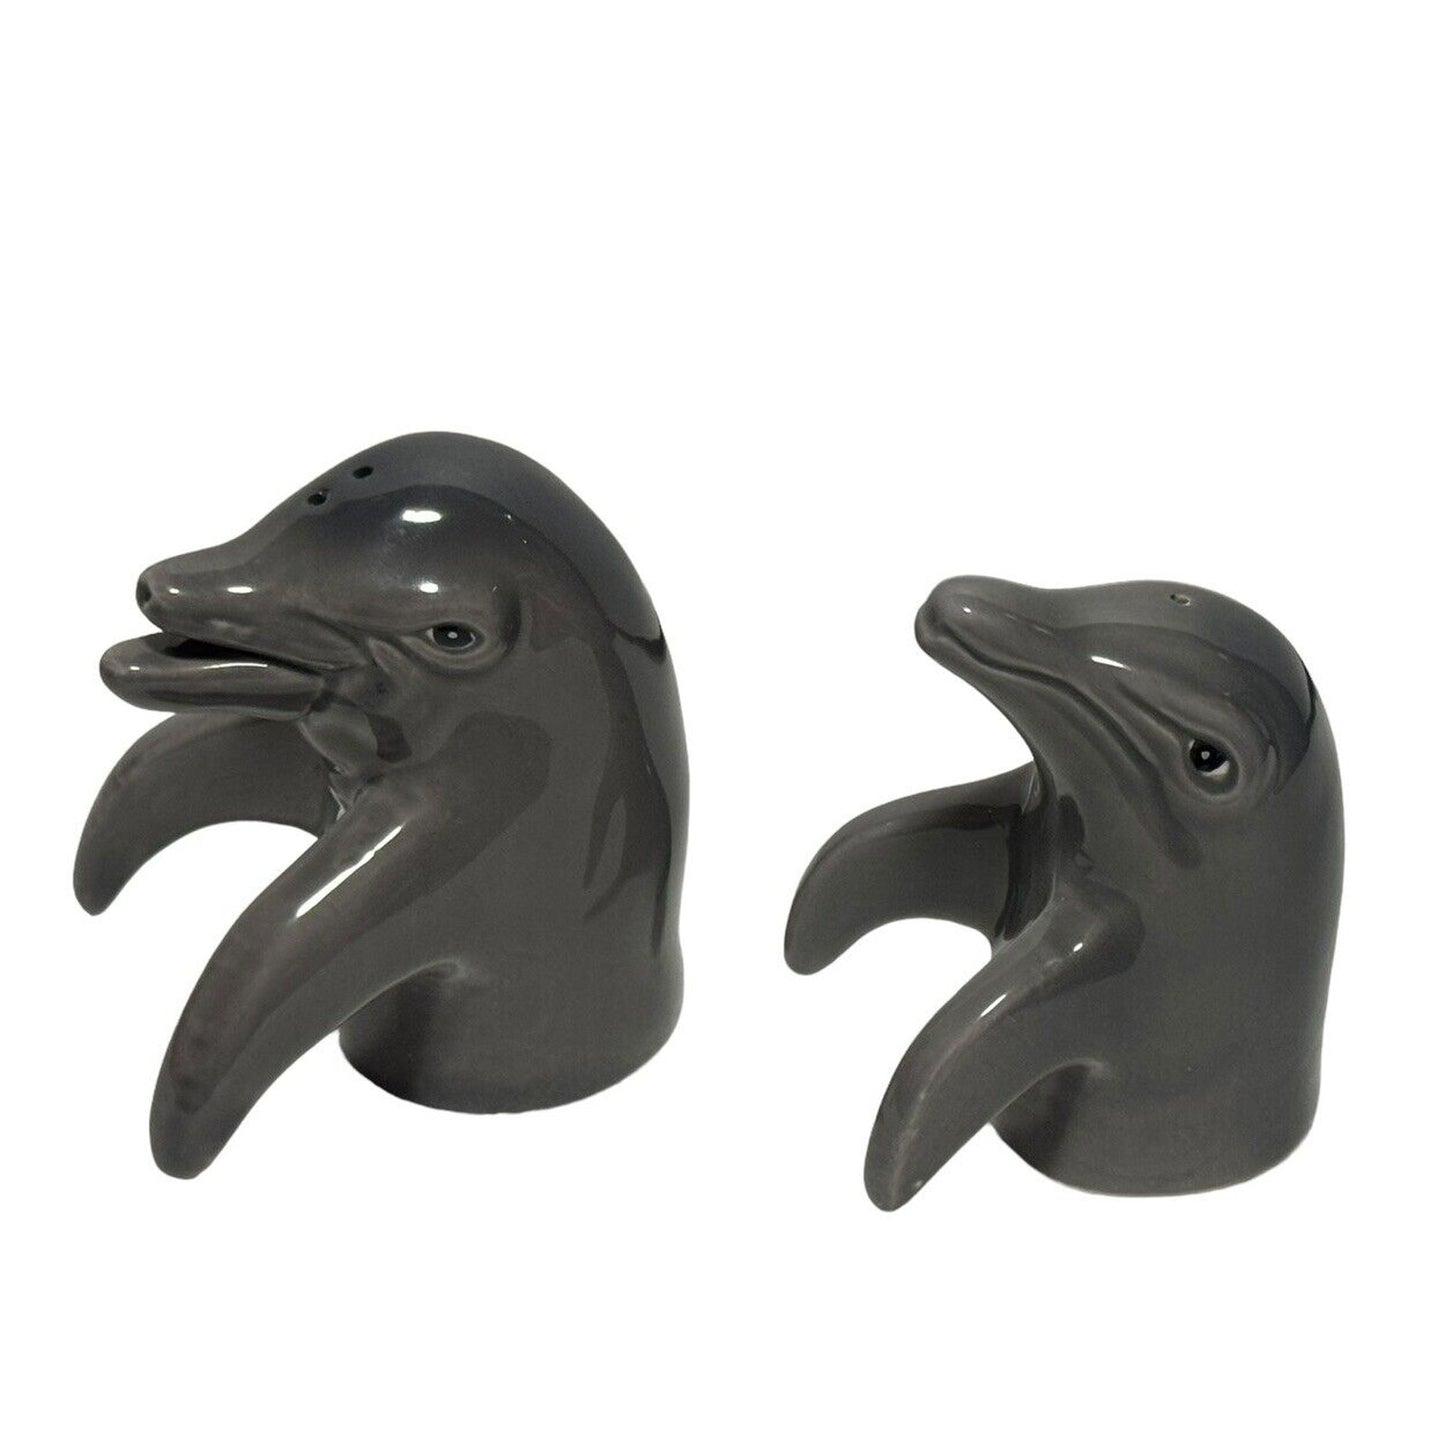 Vintage Mother & Baby Dolphin Salt and Pepper Shaker Set Gray Nautical Ceramic